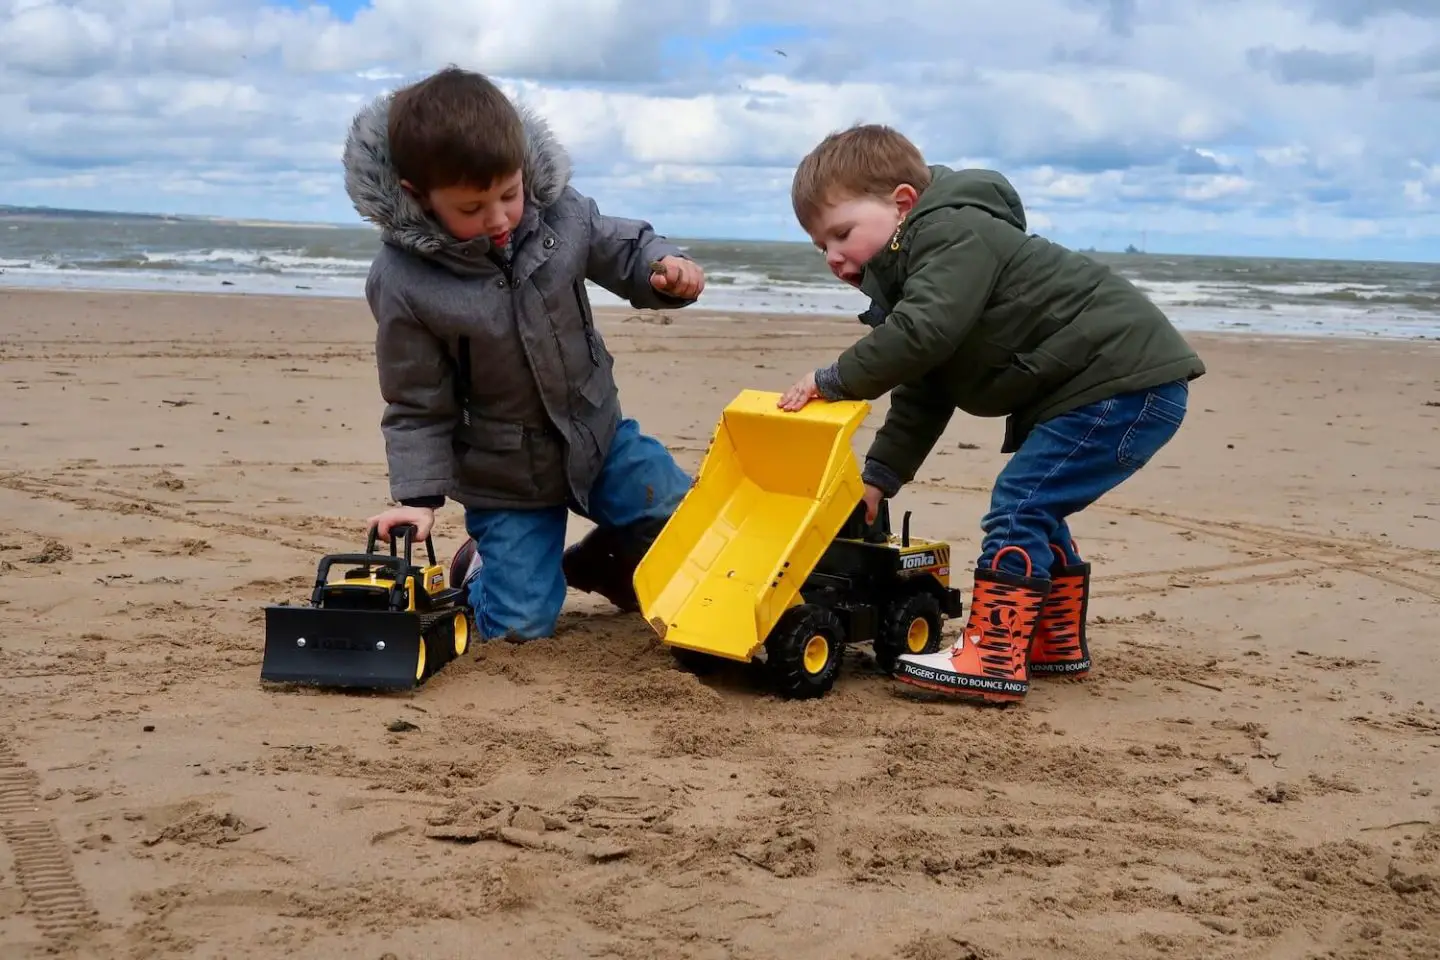 Two children play on the beach with yellow Tonka Trucks. There is a dump truck and a bulldozer. The children are animated in their play.